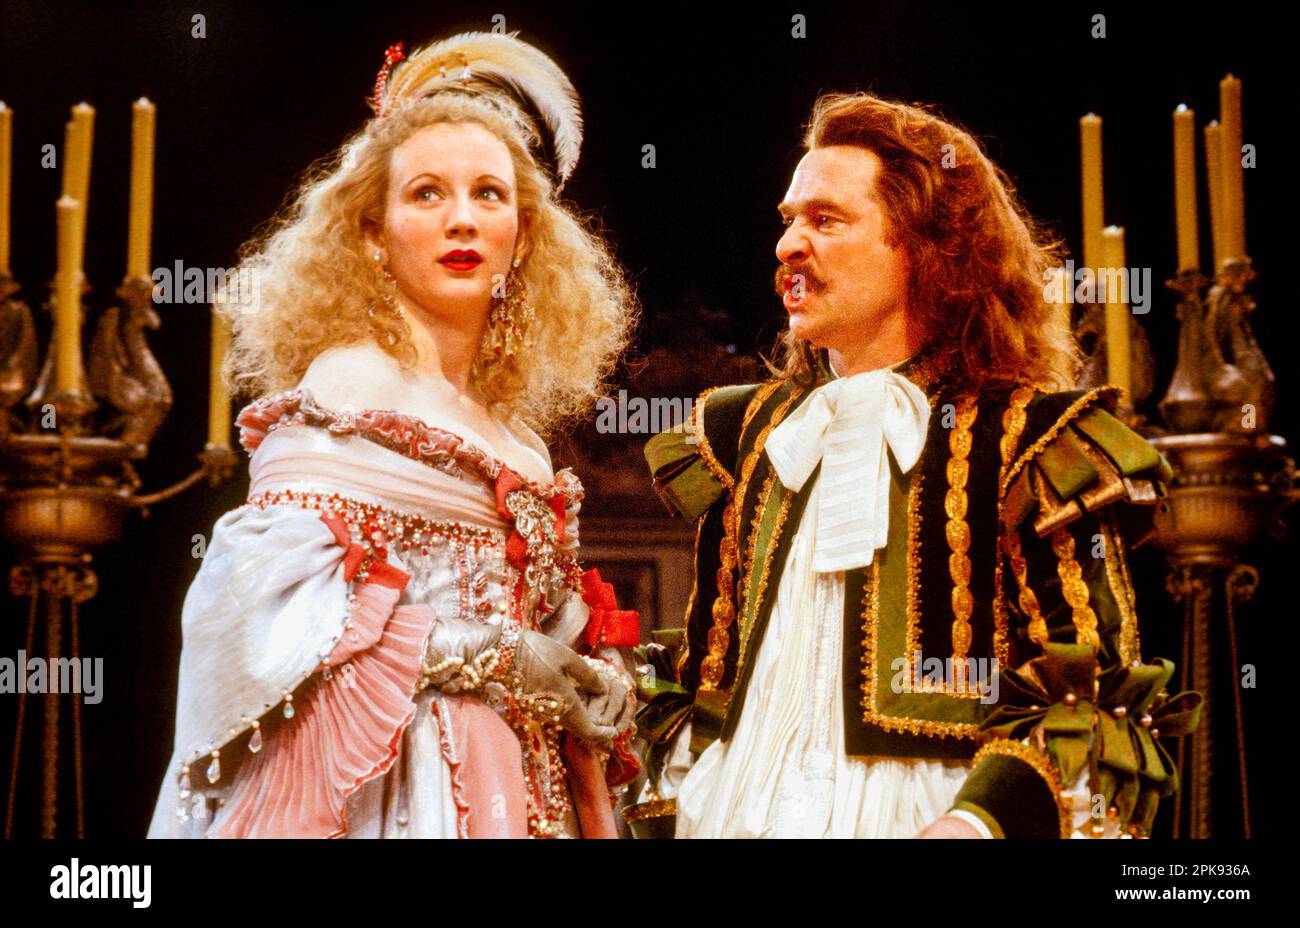 Cecilia Richards (Celimene), Tom Courtenay (Alceste) in THE MISANTHROPE by Moliere at the Royal Exchange Theatre, Manchester, England  21/05/1981  translated by Richard Wilbur  design: Malcolm Pride  lighting: Joe Davis  director: Casper Wrede Stock Photo